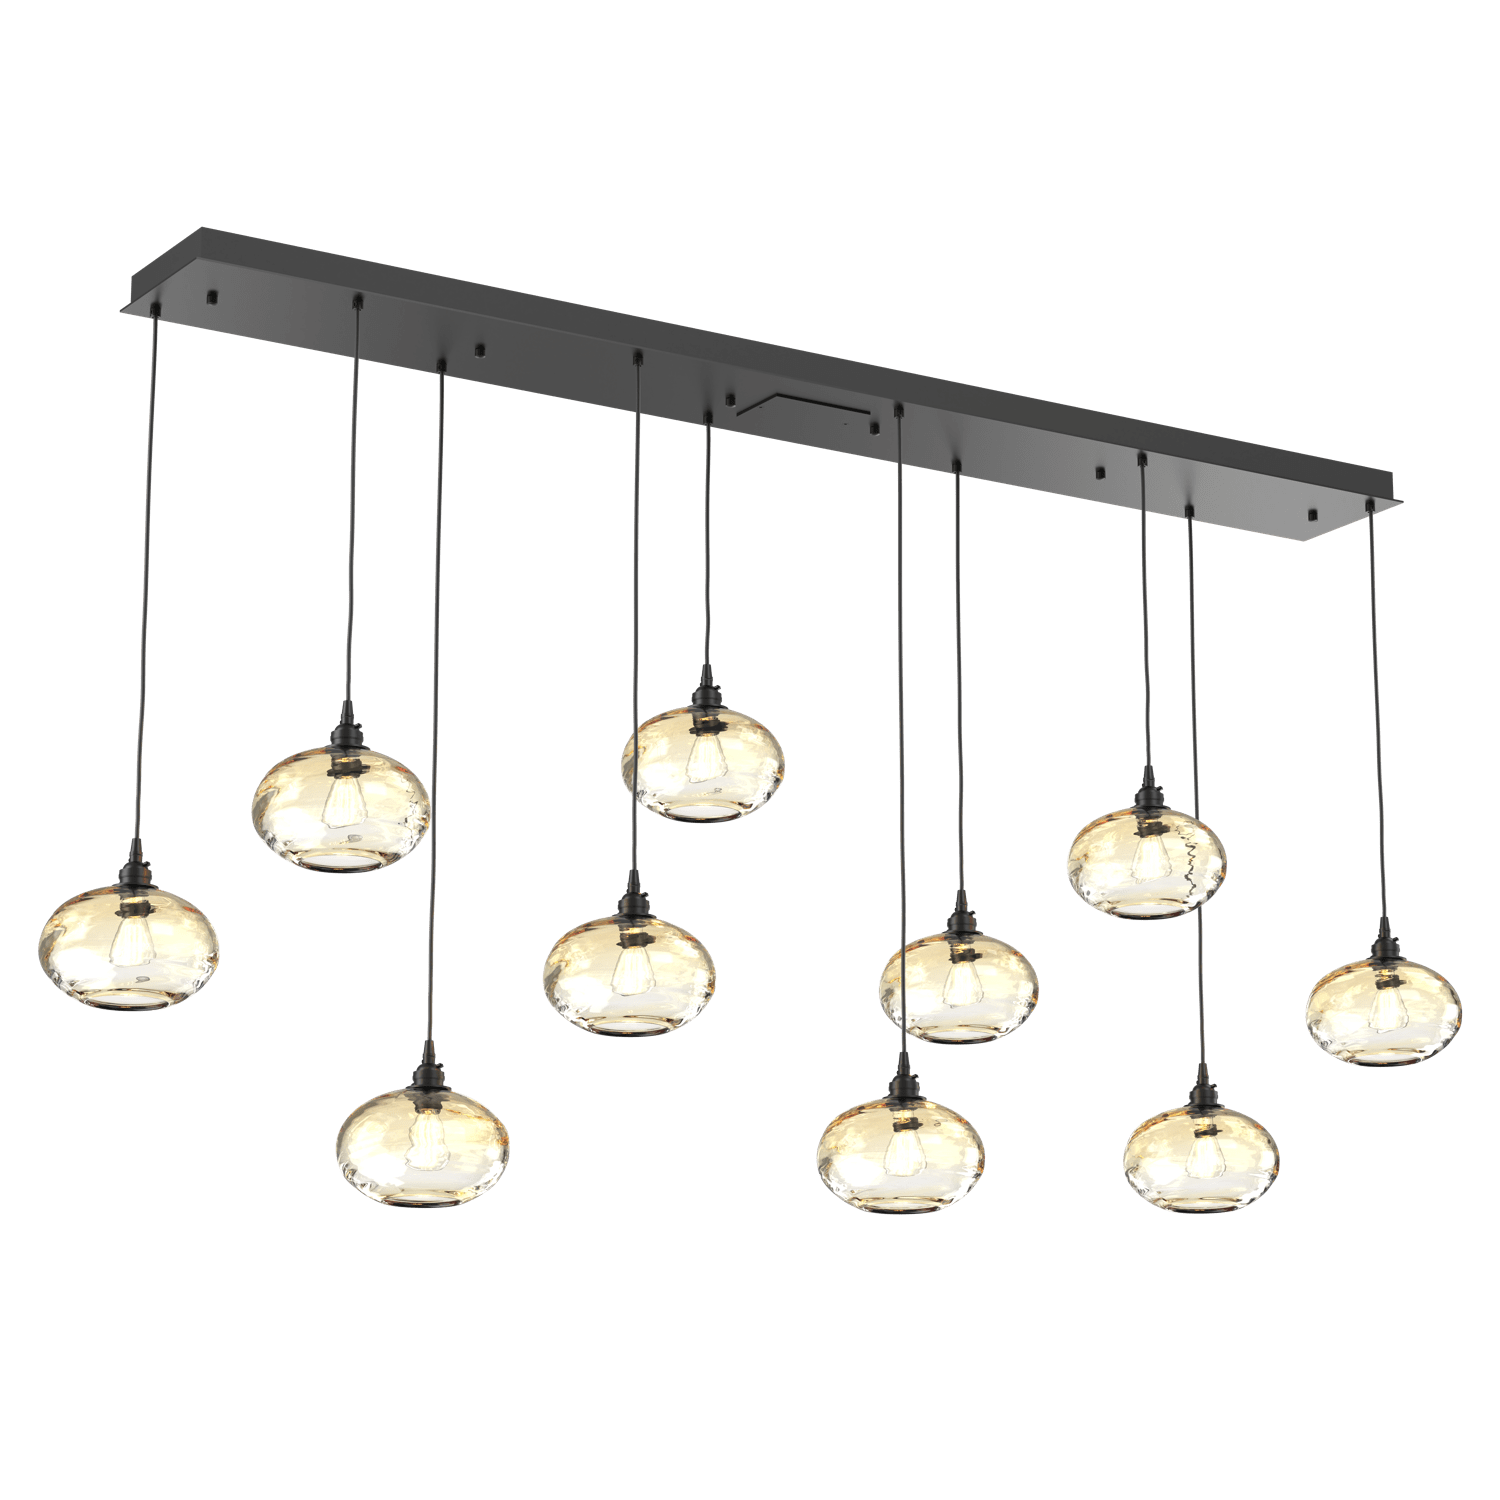 PLB0036-10-MB-OA-Hammerton-Studio-Optic-Blown-Glass-Coppa-10-light-linear-pendant-chandelier-with-matte-black-finish-and-optic-amber-blown-glass-shades-and-incandescent-lamping